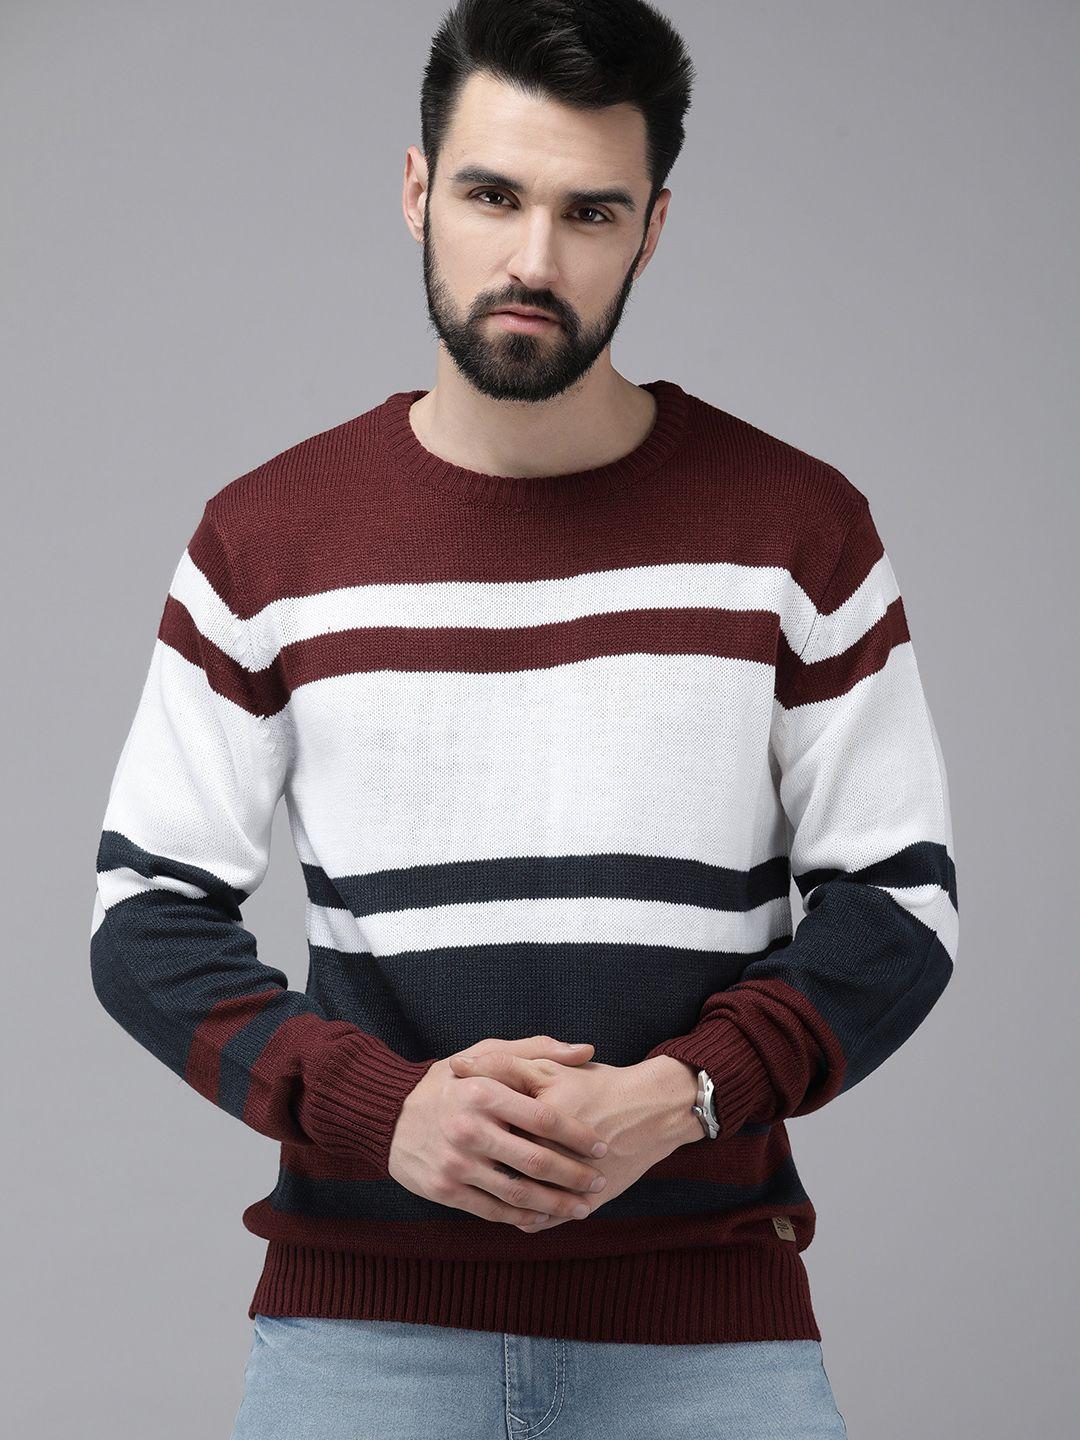 the roadster lifestyle co men white & navy blue striped pullover sweater